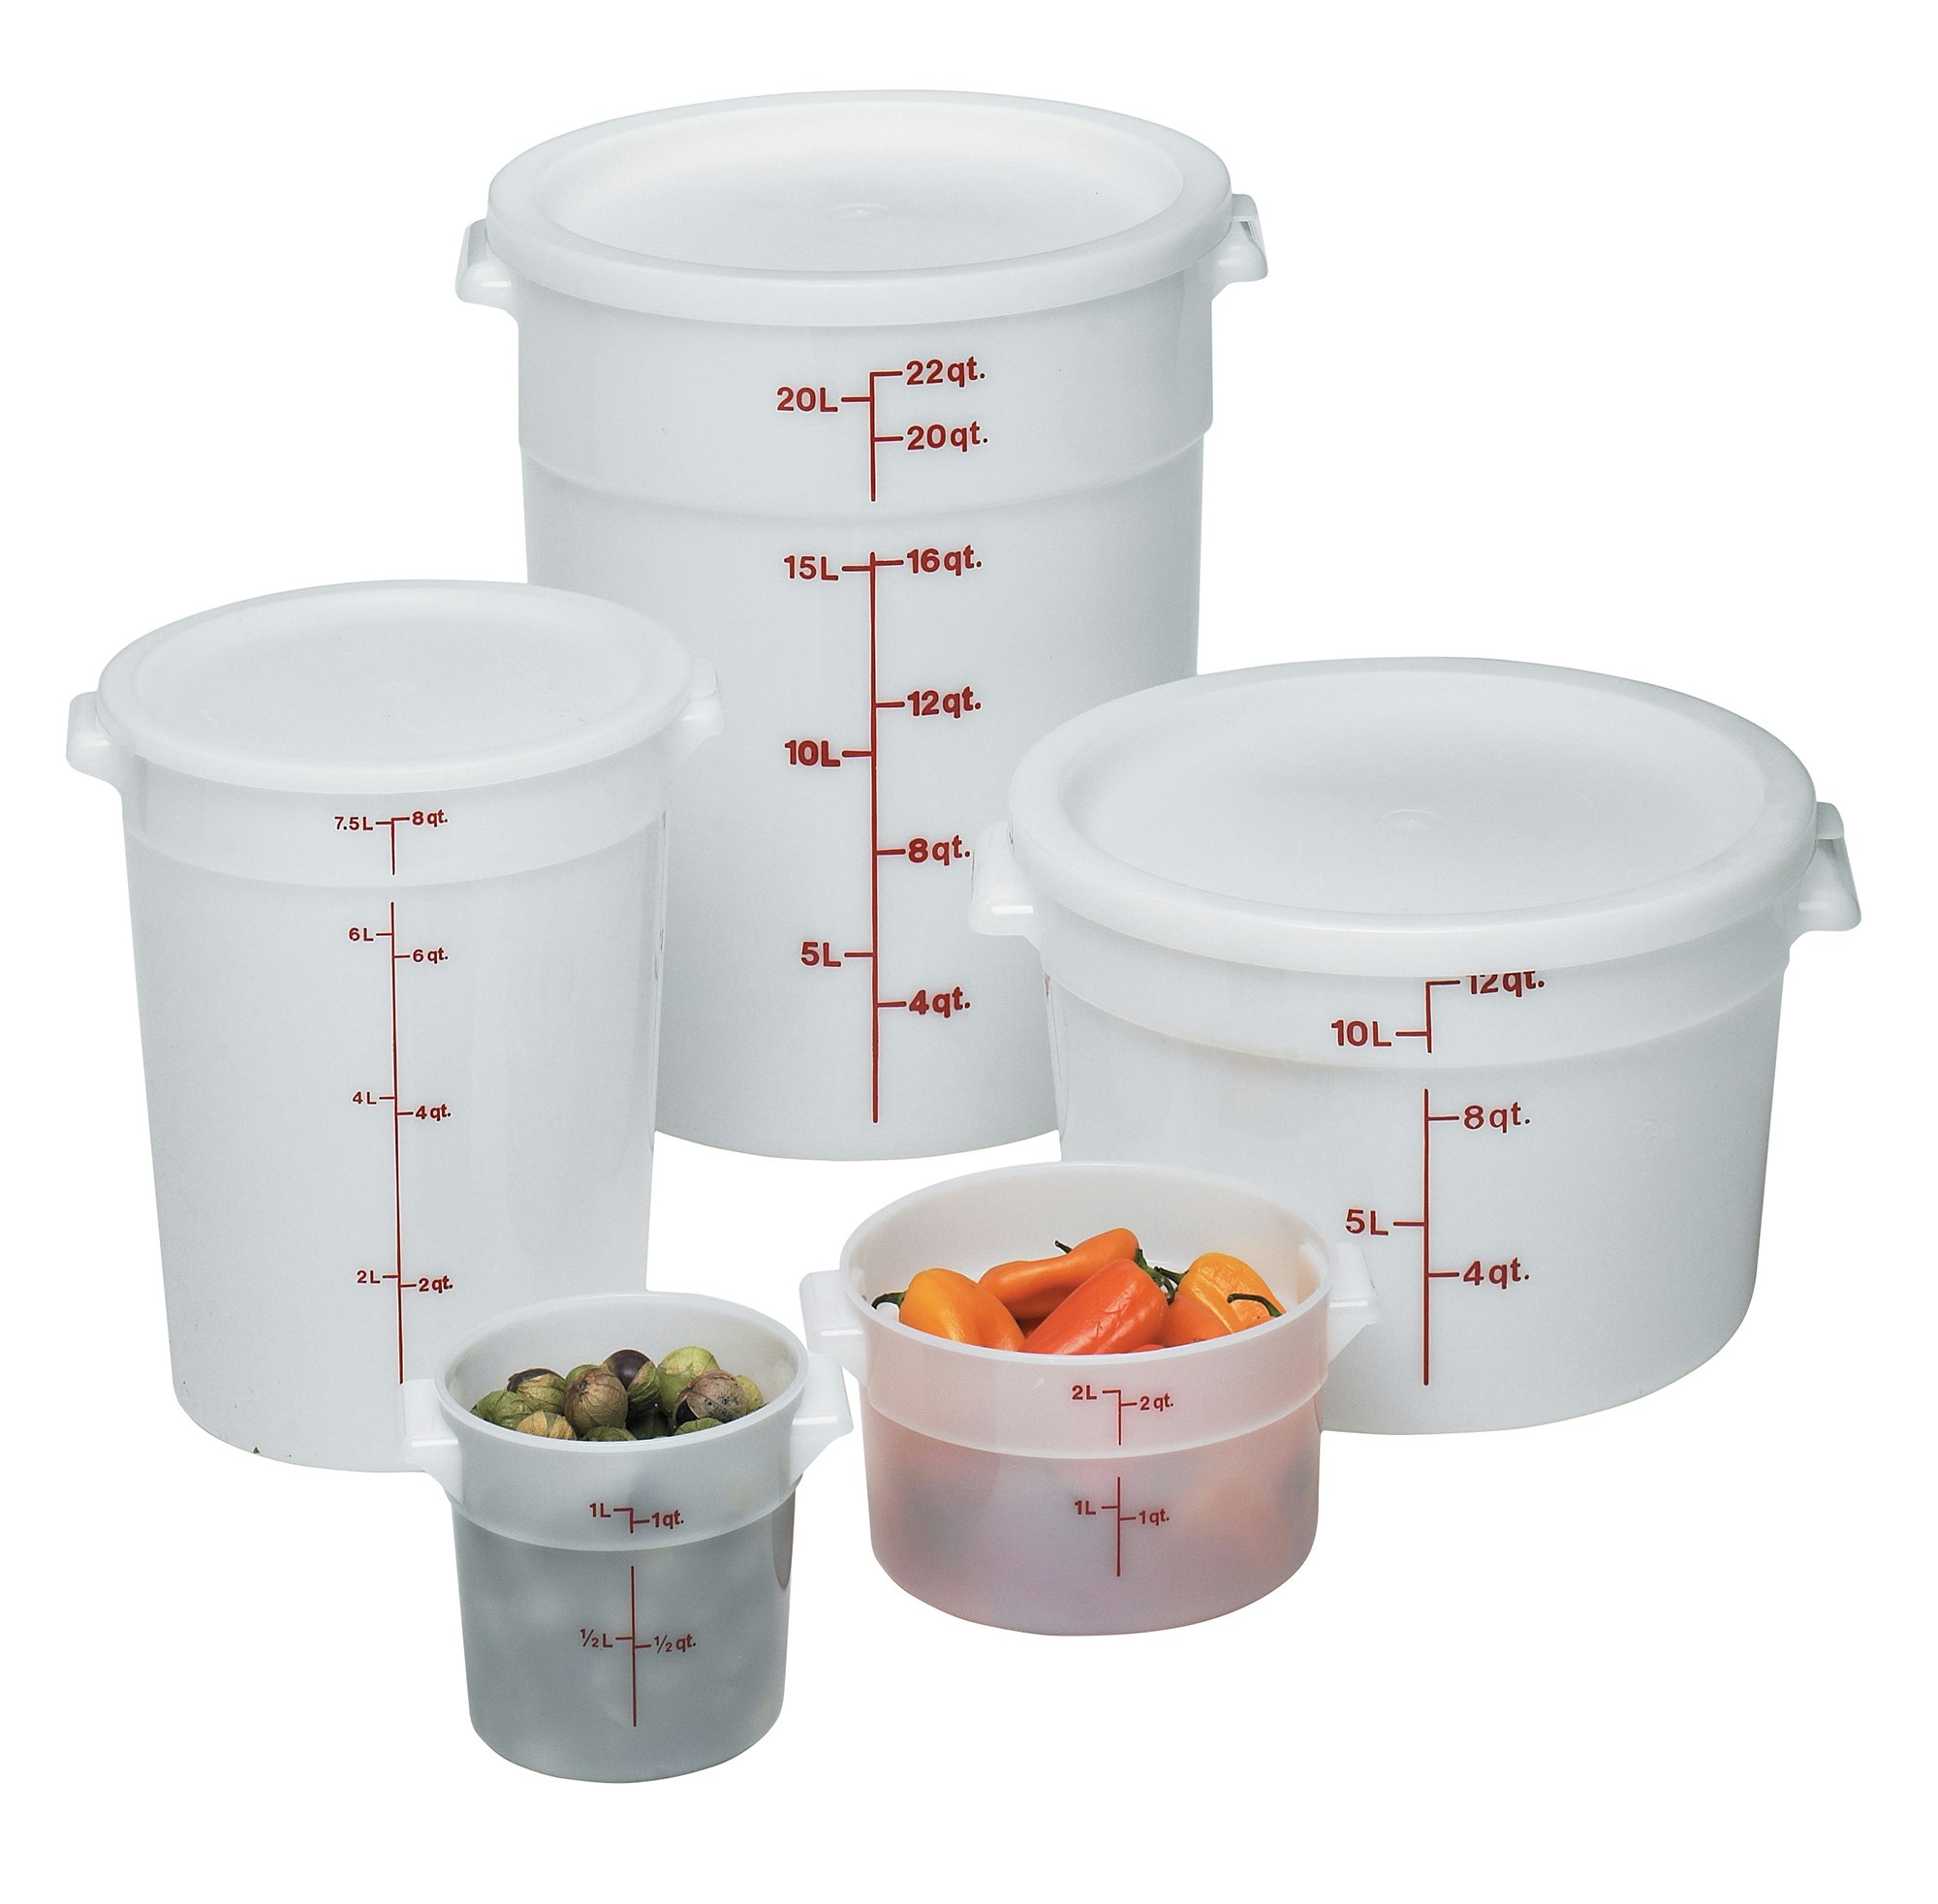 Glad Tall Entree Food Storage Containers, 3-Pack